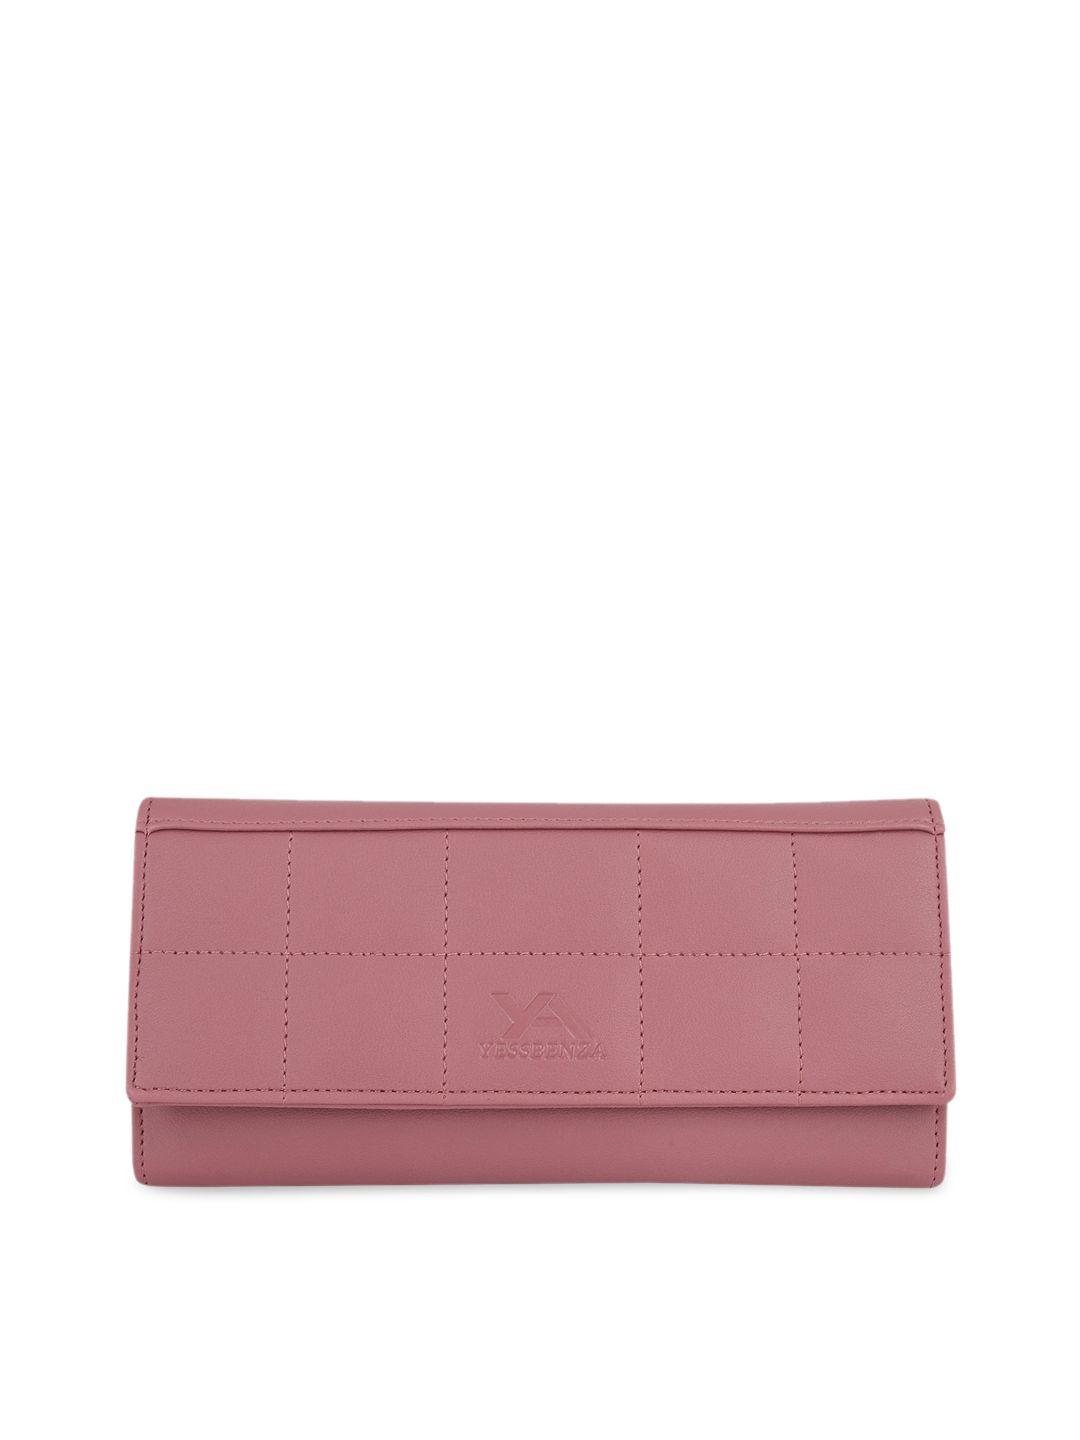 yessbenza women peach-coloured embroidered envelope